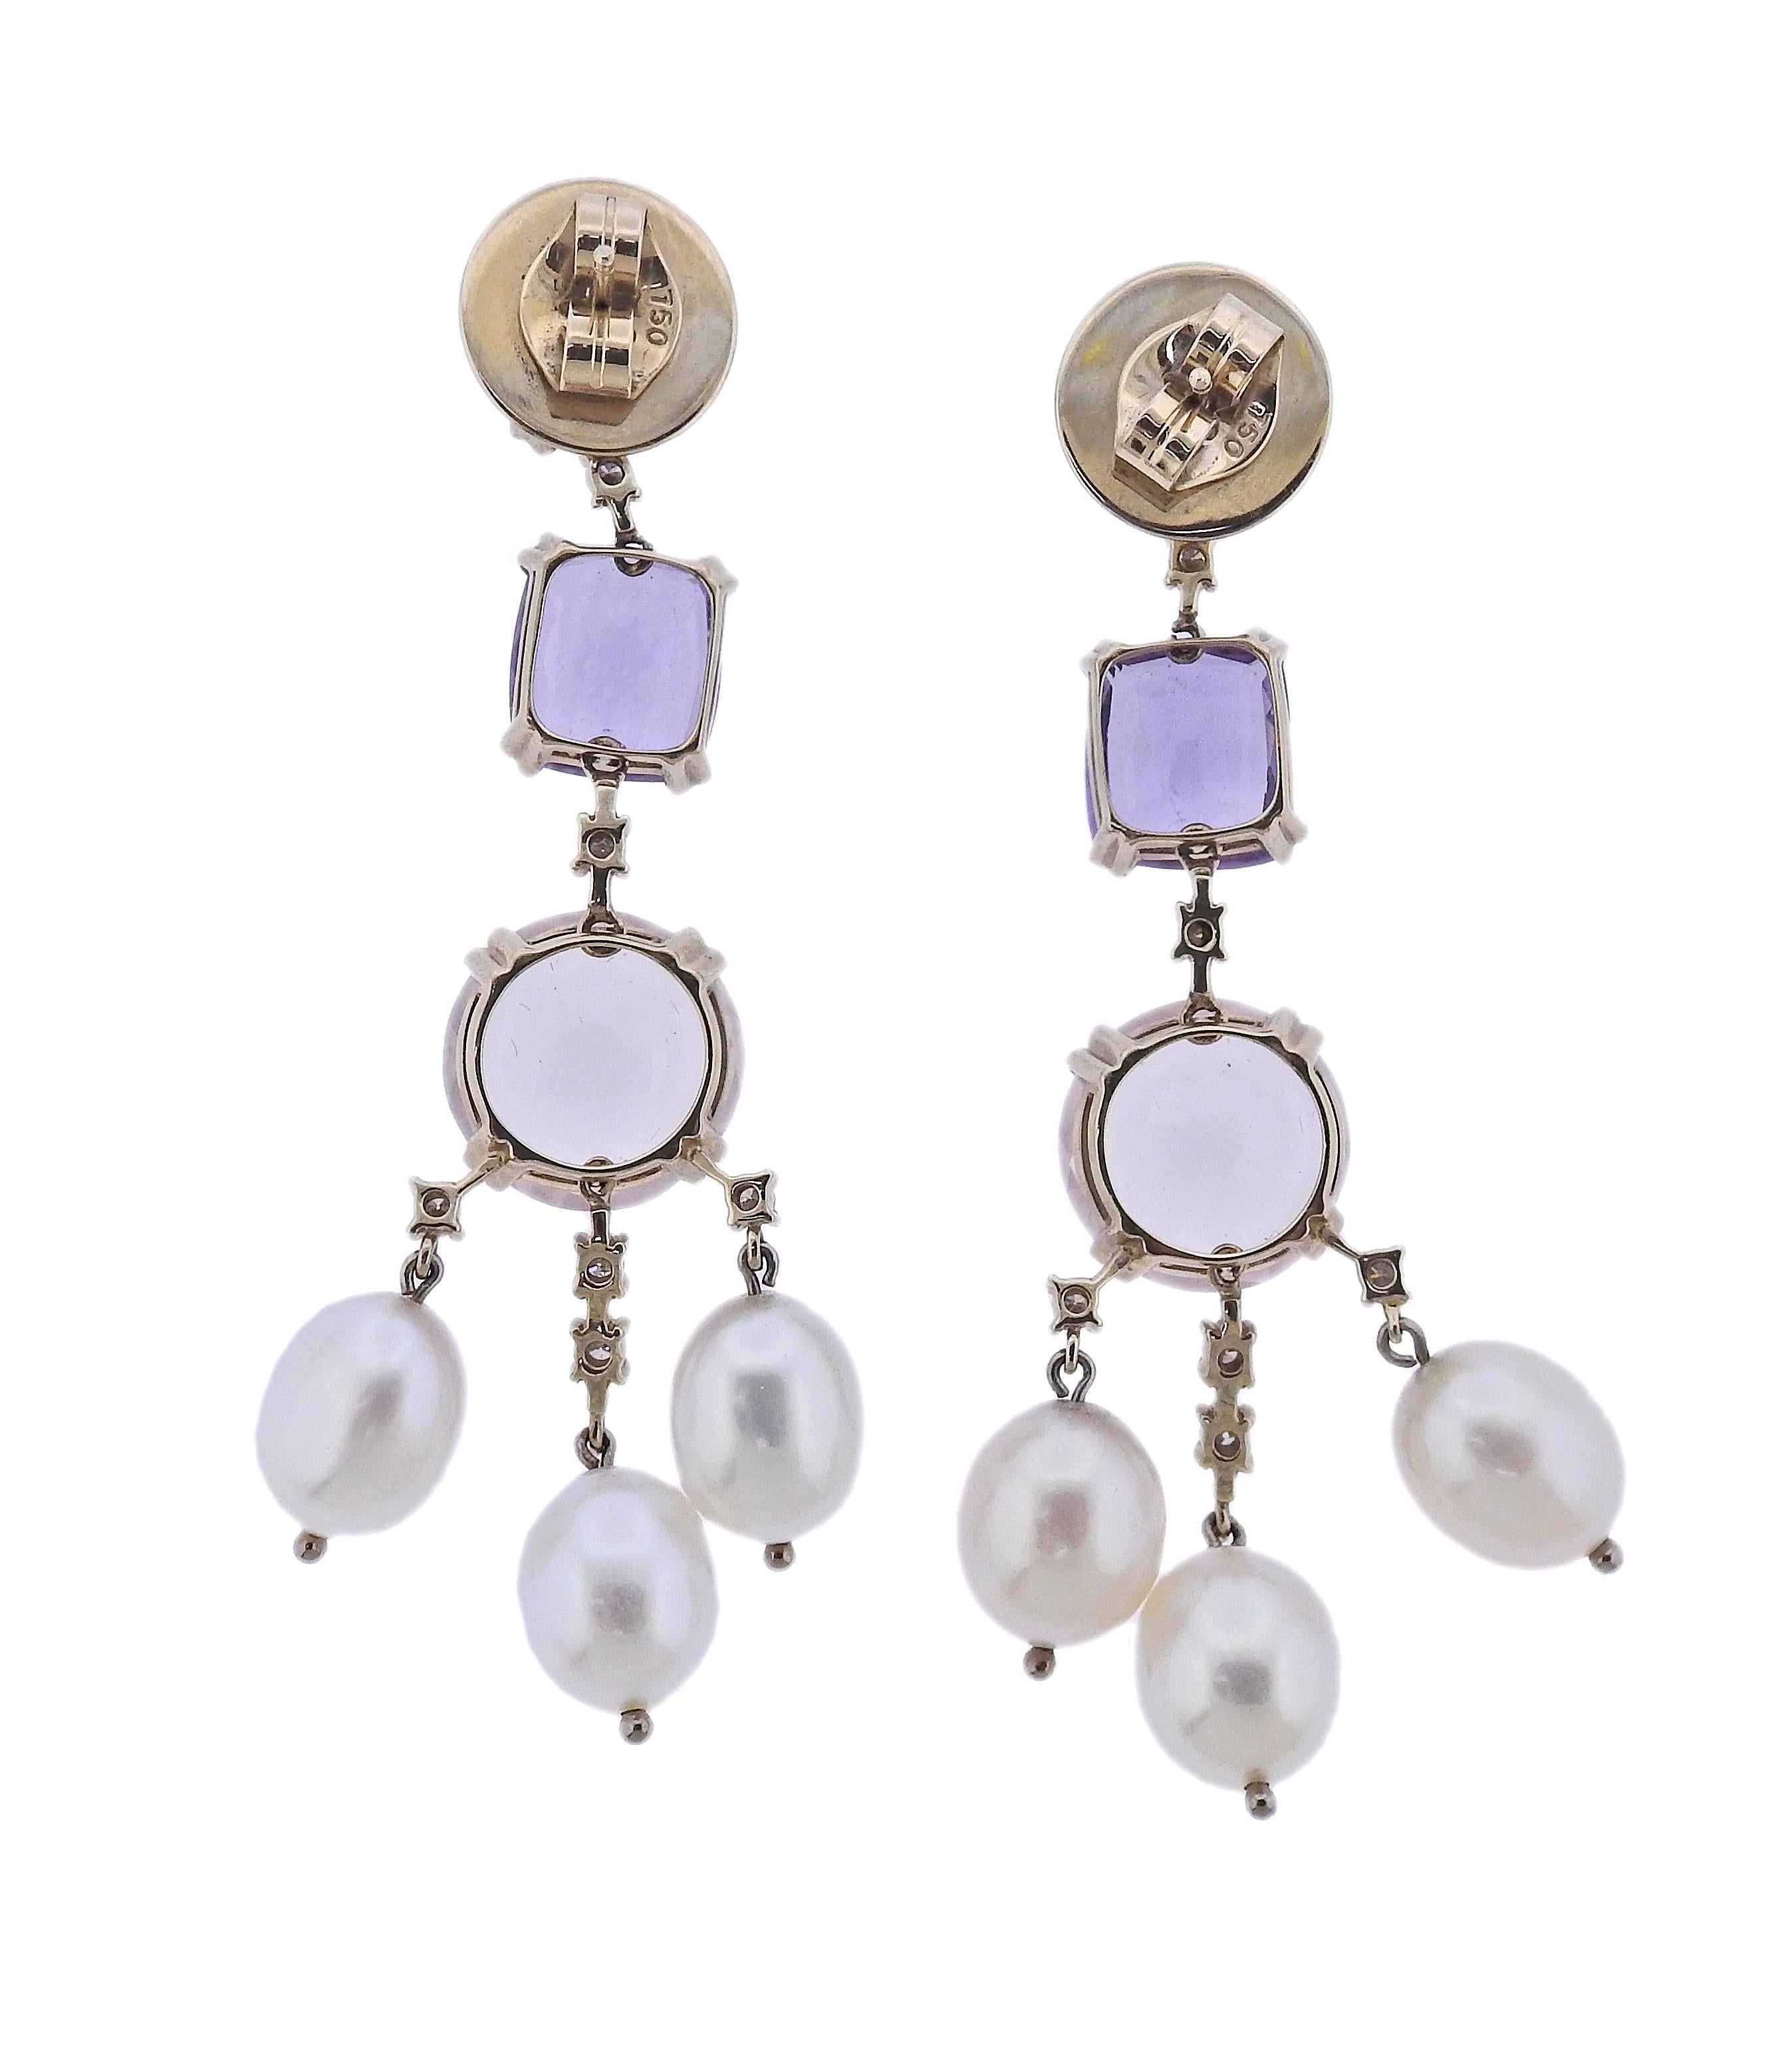 Pair of 18k gold Cobblestone earrings by H. Stern, with approx. 0.36ctw G/VS diamonds, pearls, rose quartz and amethyst.  Earrings are 2.5